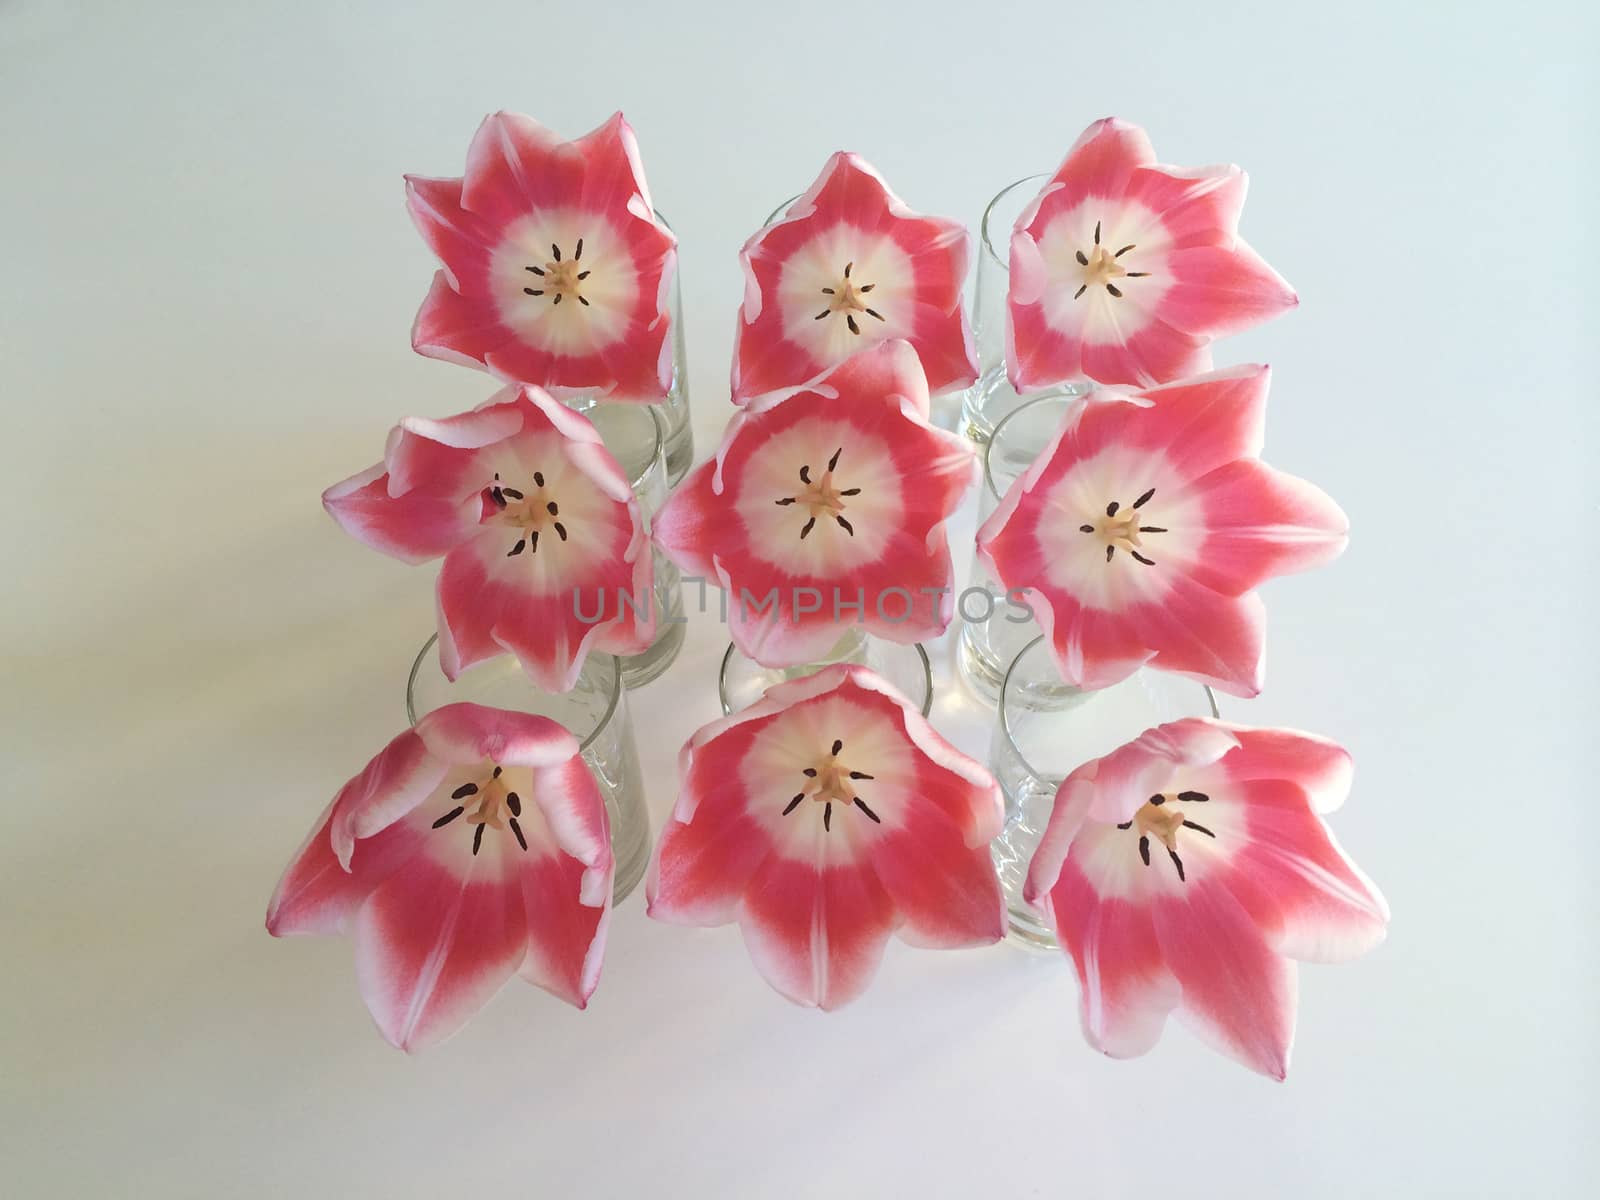 Rows of pink and white tulips